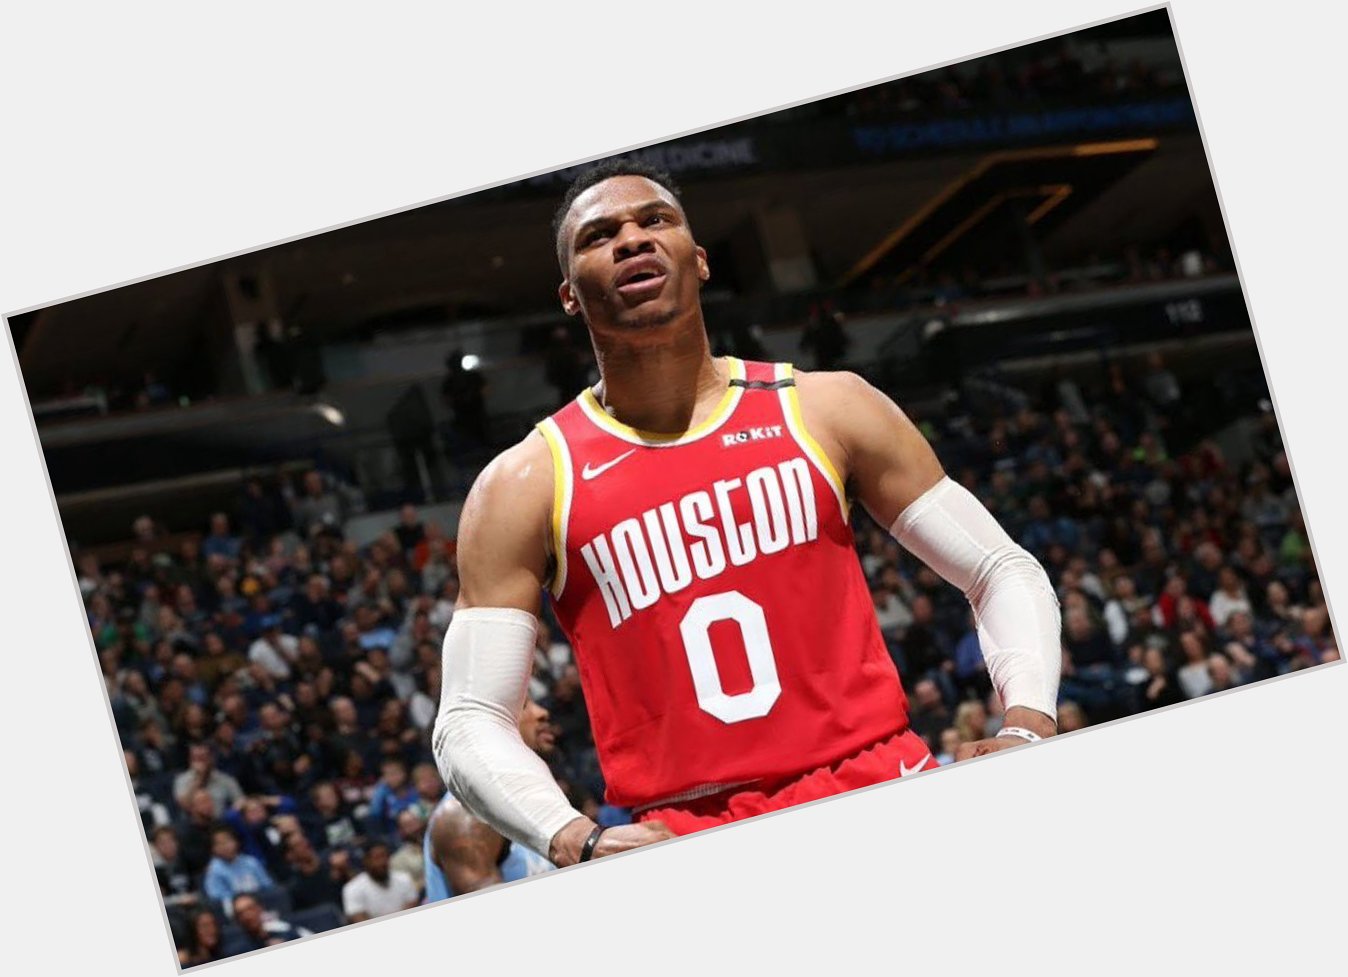 Happy Birthday to Russell Westbrook. Where will he end up playing this season? 